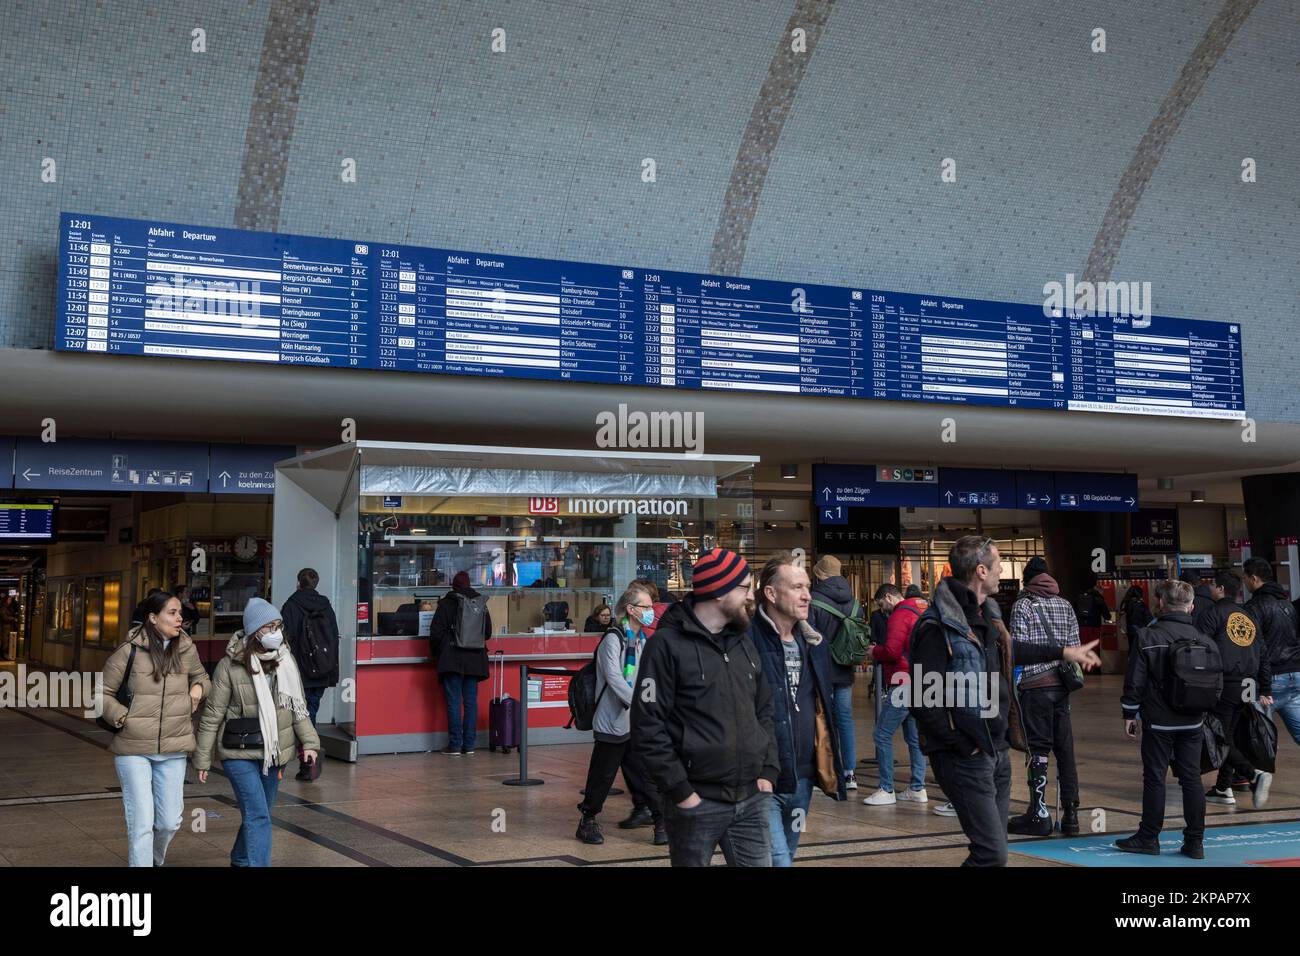 new 17 meter long LED display board in the entrance hall at the main station in Cologne, Germany. neue 17 Meter lange LED Anzeigentafel in der Eingang Stock Photo